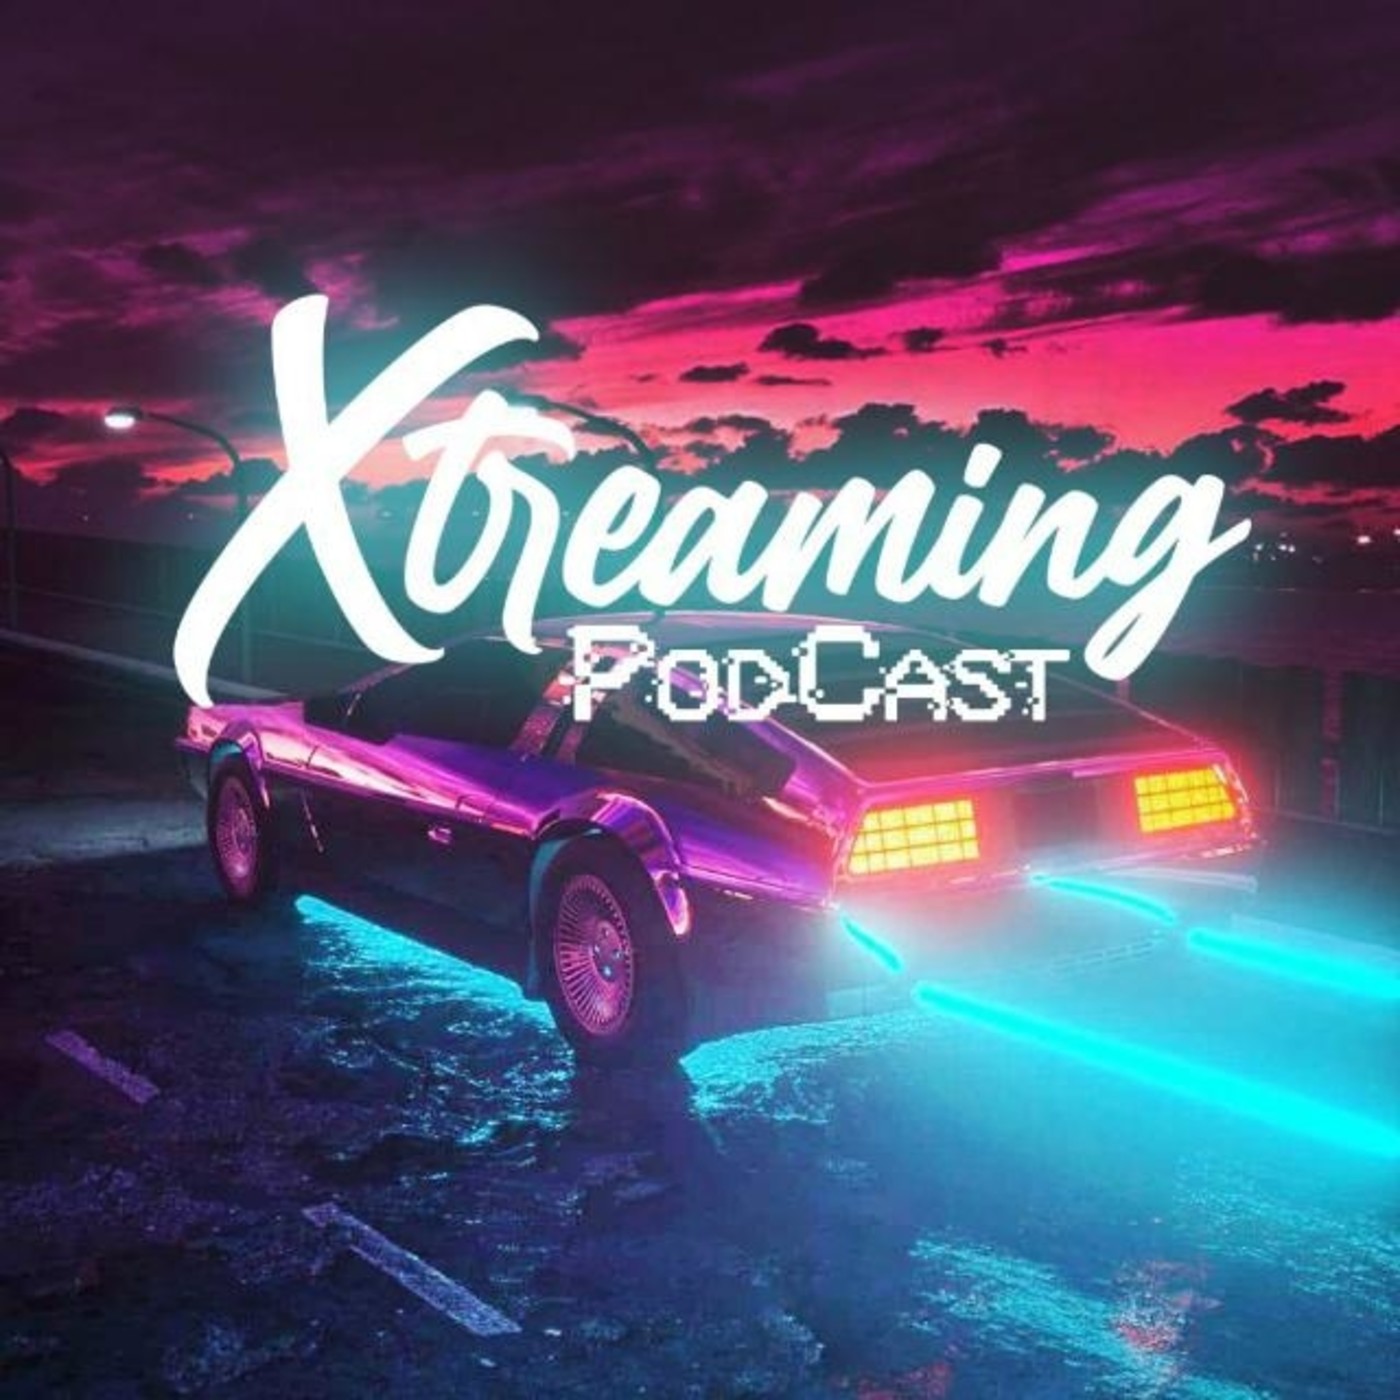 Xtreaming Podcast